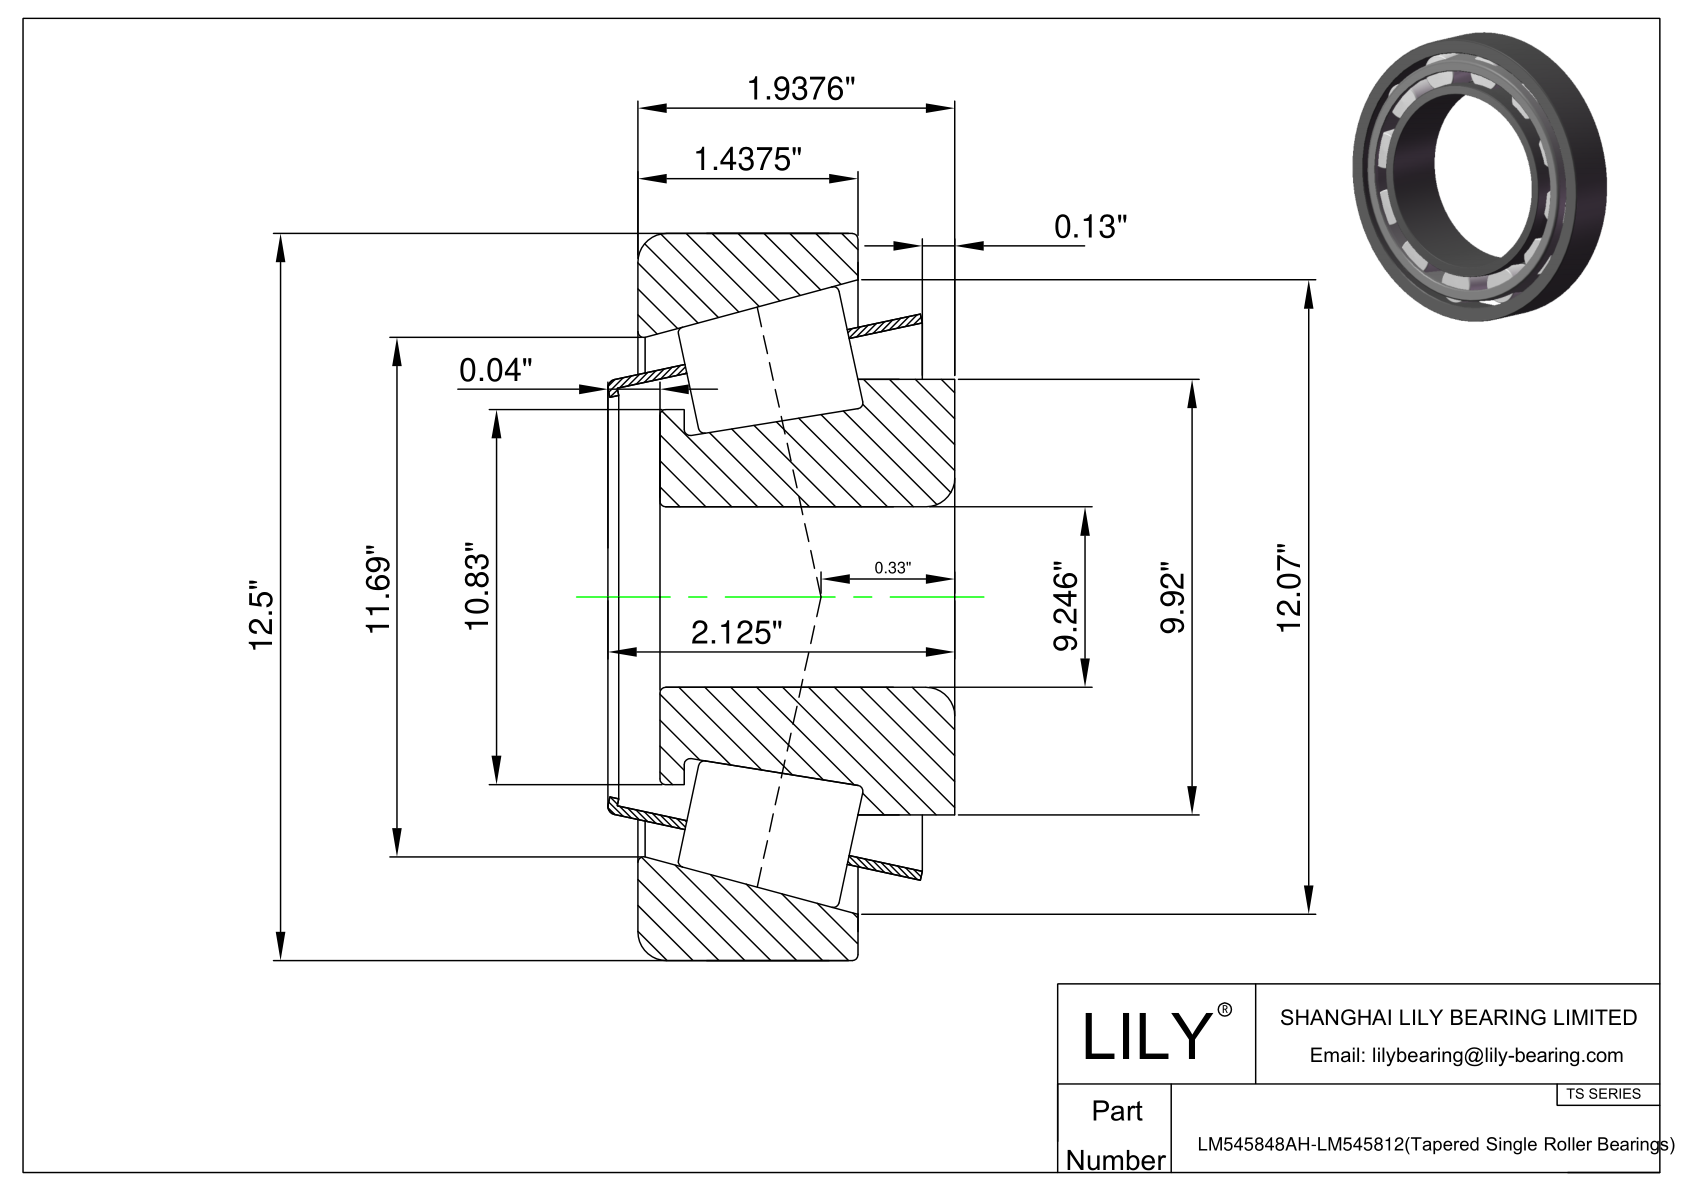 LM545848AH-LM545812 TS (Tapered Single Roller Bearings) (Imperial) cad drawing